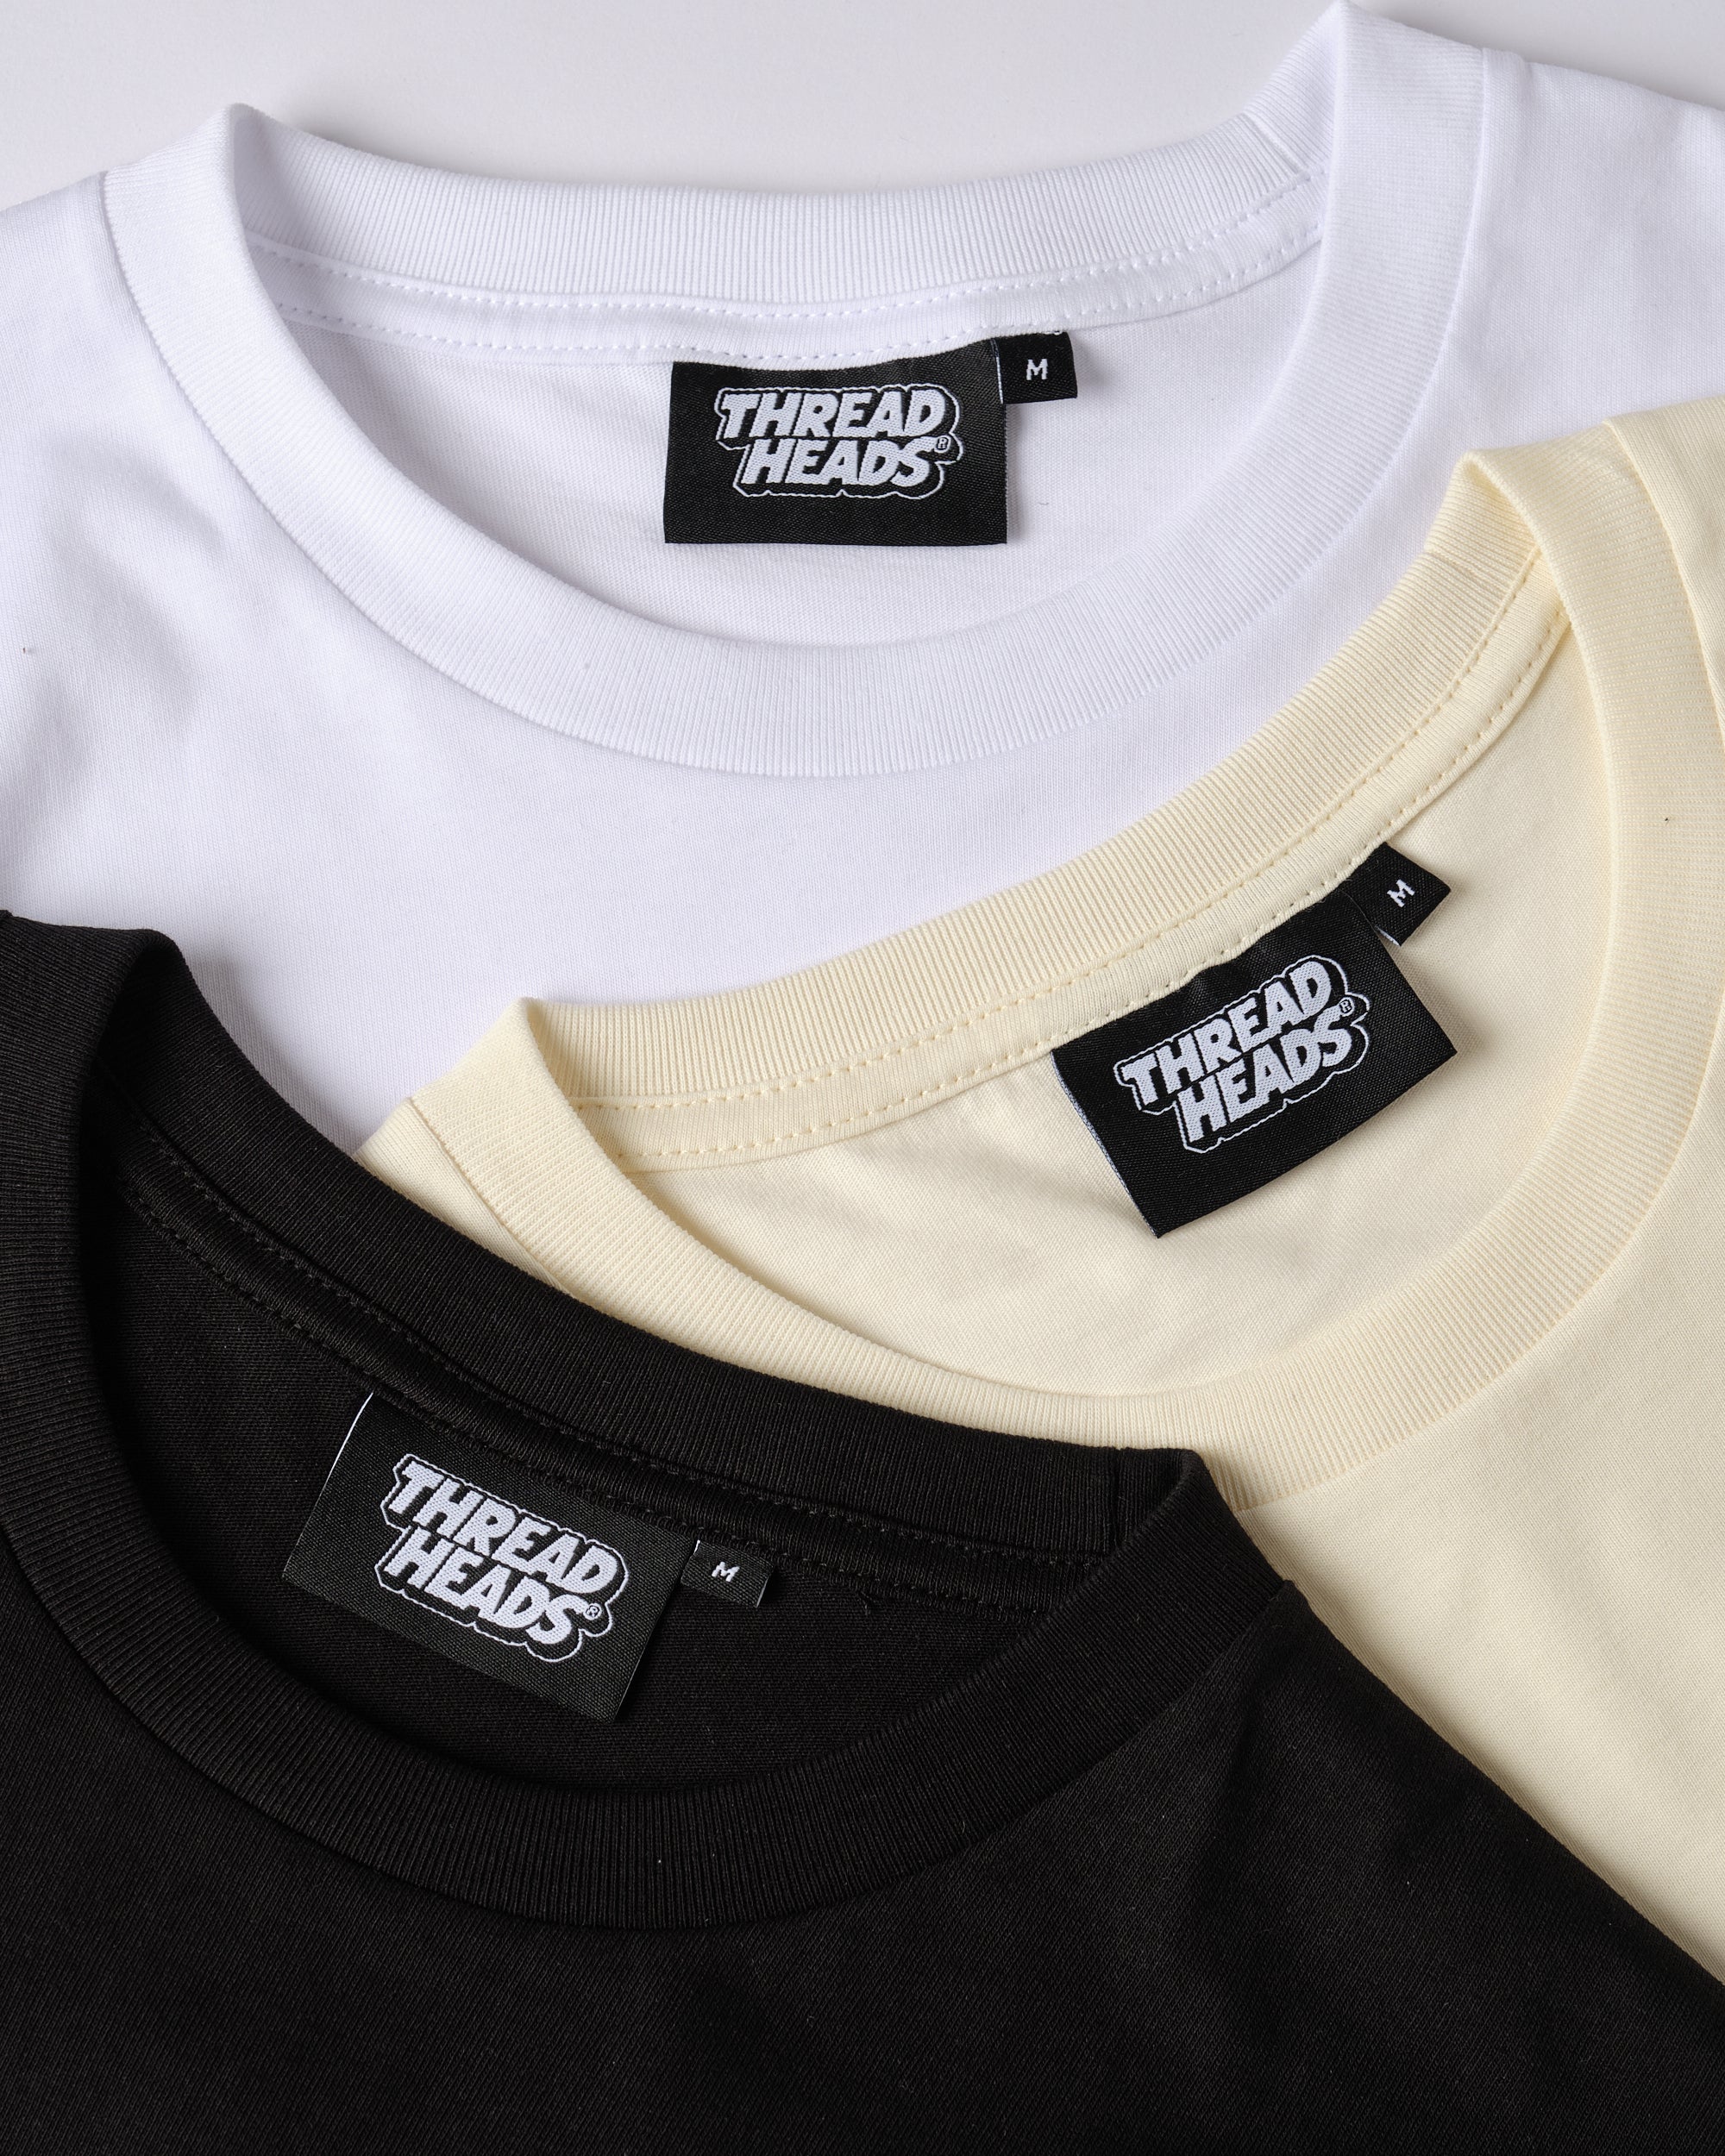 Classic Tee 3-Pack: Black, Natural & White